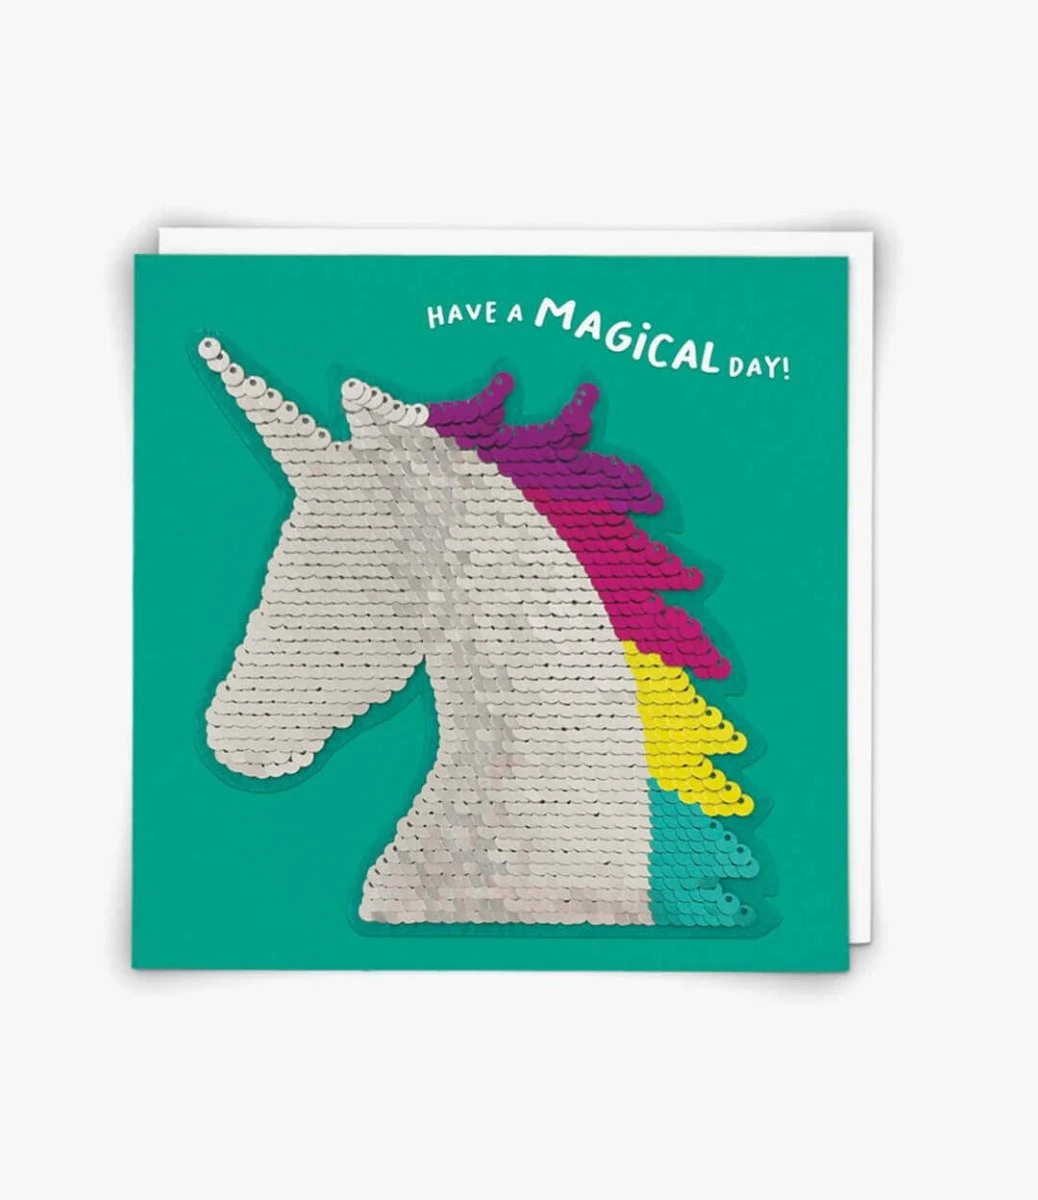 "Unicorn" Contemporary Greeting Card by Redback